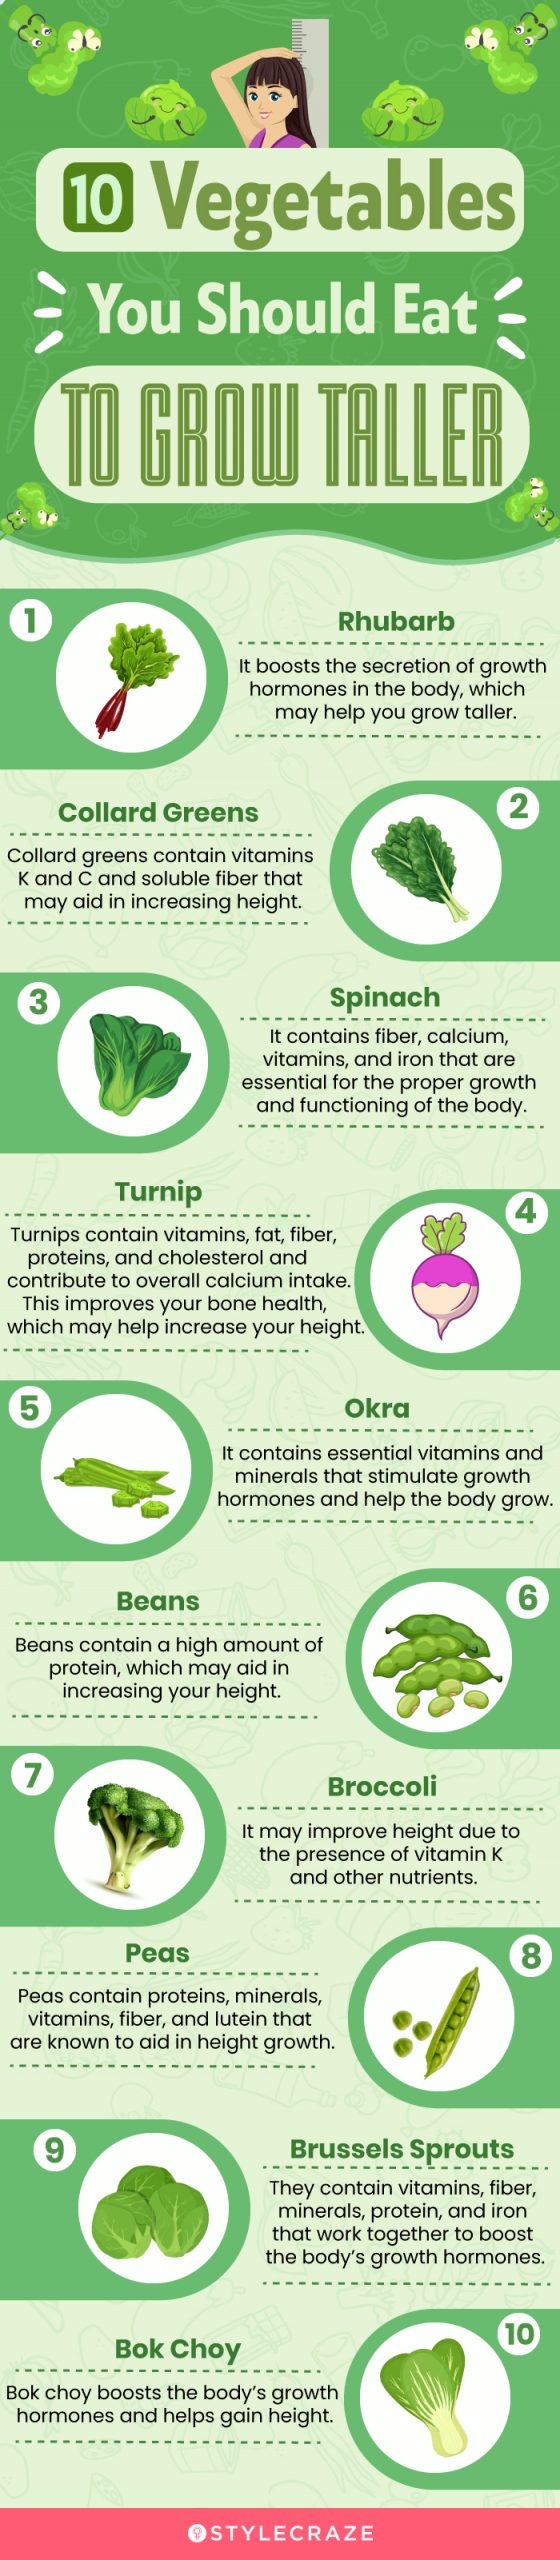 10 vegetables you should eat to grow tall (infographic)